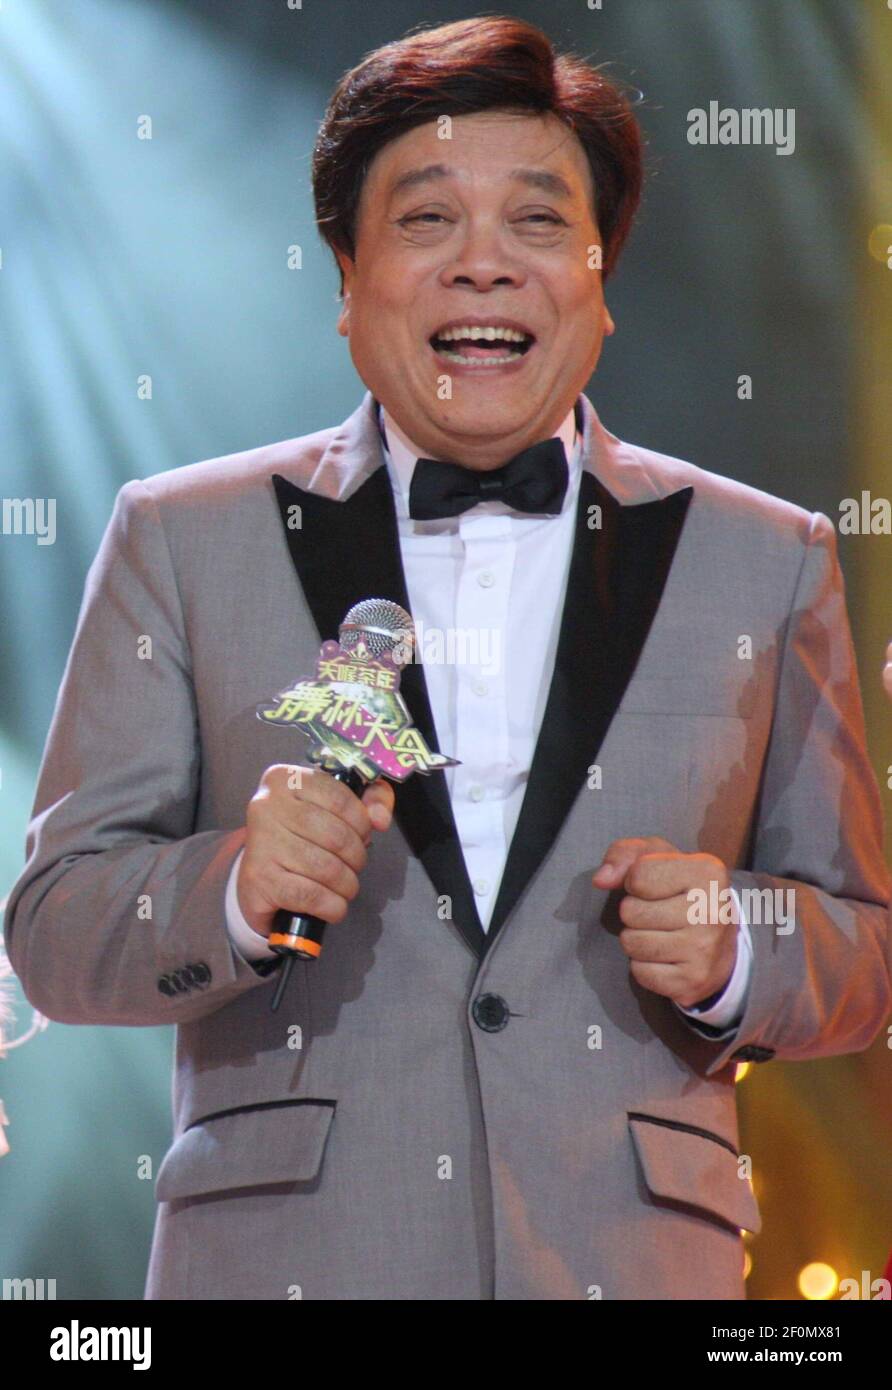 Chinese news anchor Zhao Zhongxiang speaks at the stage of a TV program, Shanghai, China, 6 August 2009. Zhao Zhongxiang, one of the most famous Chinese TV hosts and news anchors, has died on Thursday in Beijing at the age of 78. The TV host is a household name in China, he started working as a news anchor for Beijing Television in 1959, which later became China Central Television (CCTV). There he became the second TV news anchor and the first male TV news anchor in China's history. In 1979, he went with Chinese leader Deng Xiaoping on a state visit to the United States, and became the first j Stock Photo